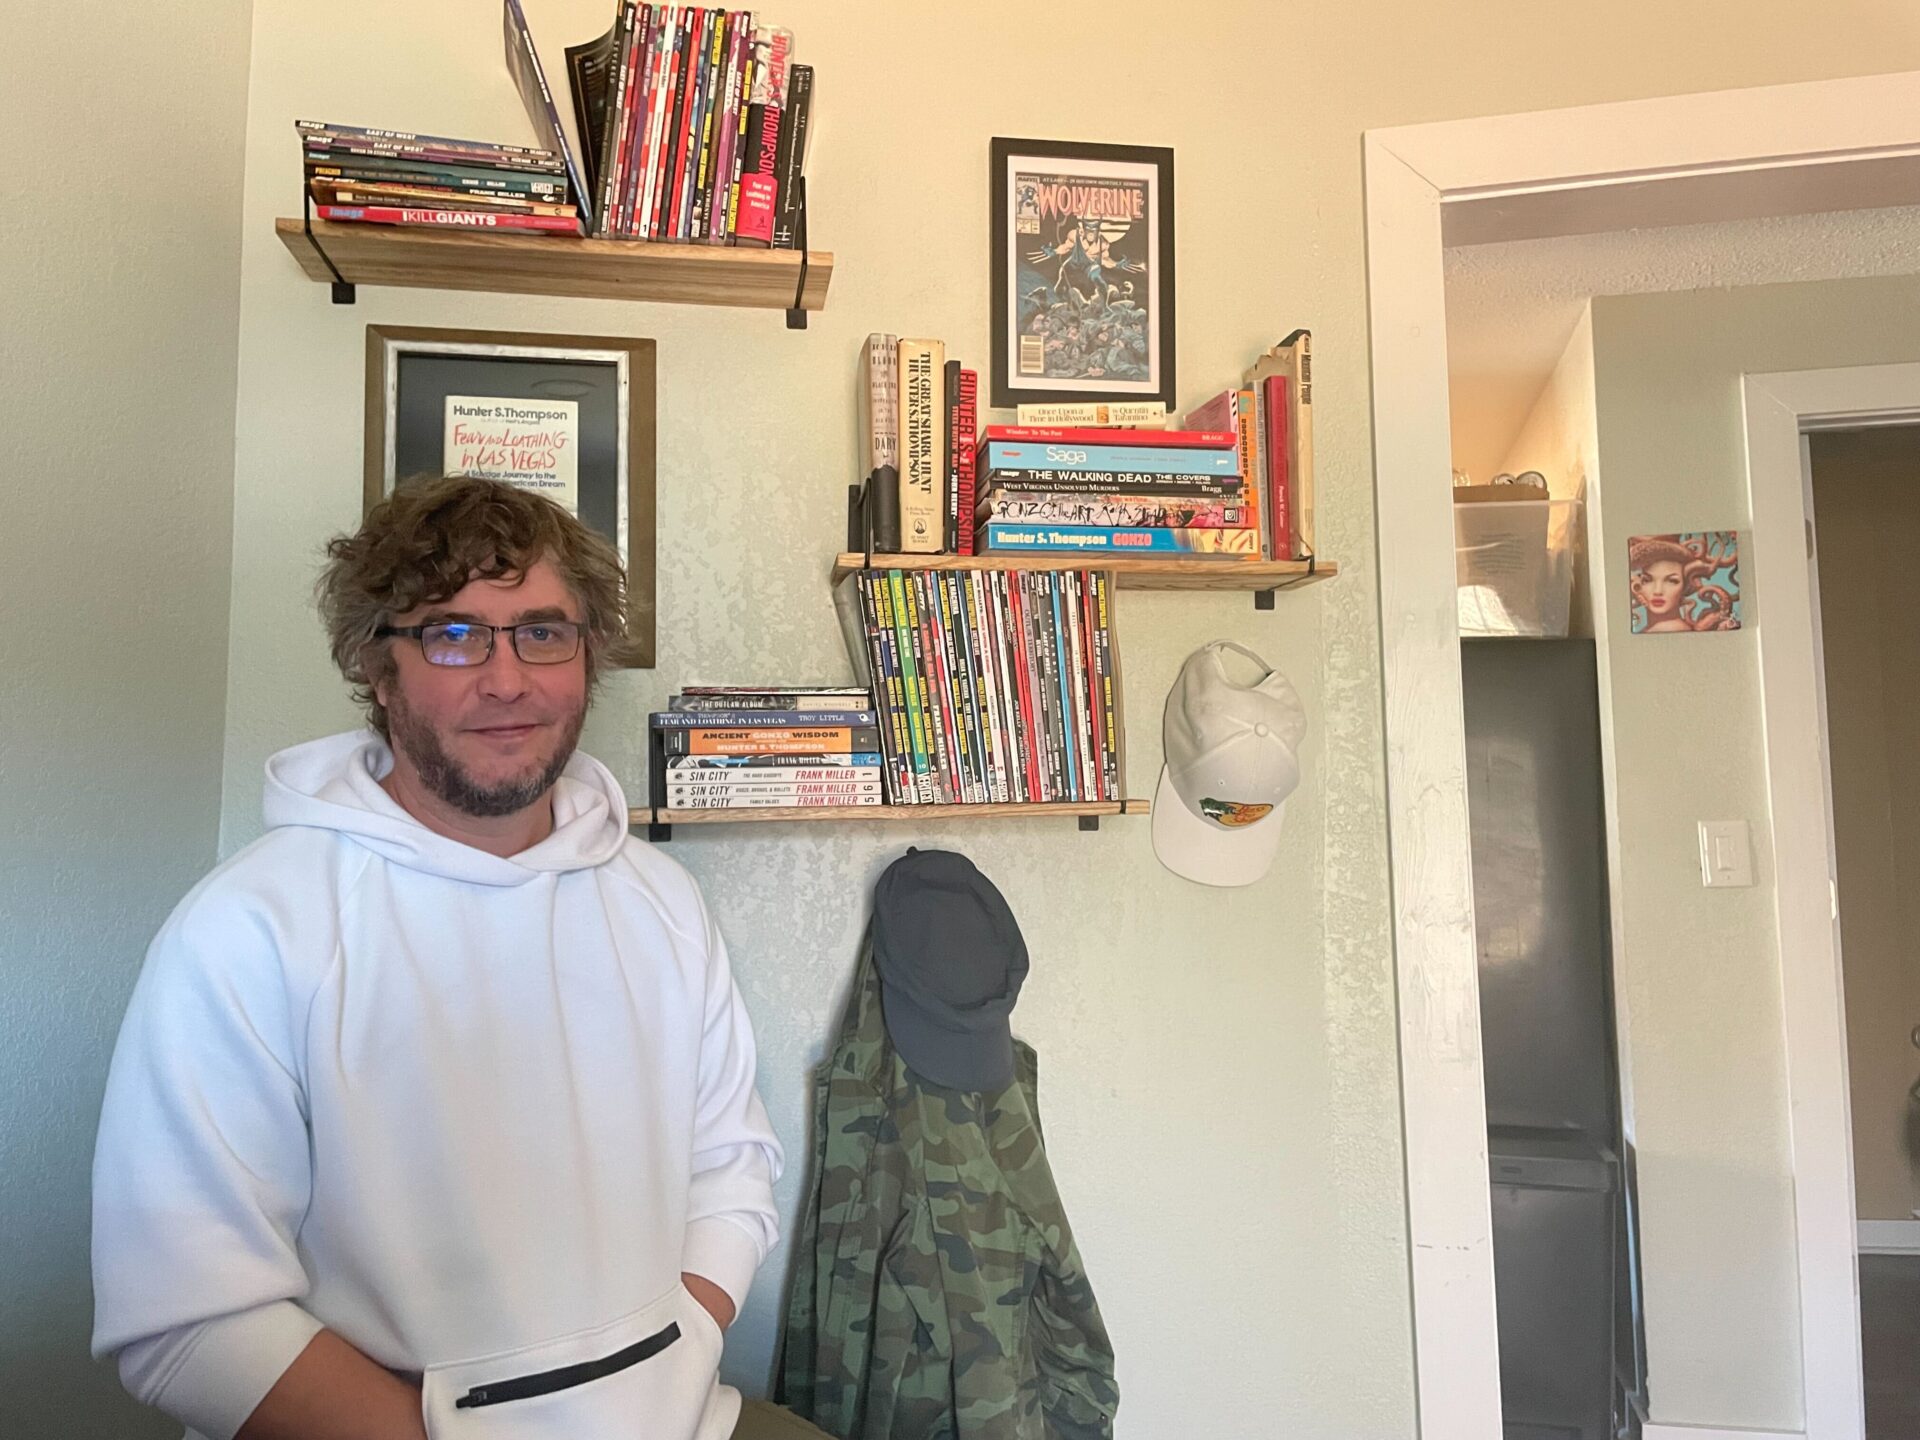 Man in white hoodie sits Infront of bookshelves.